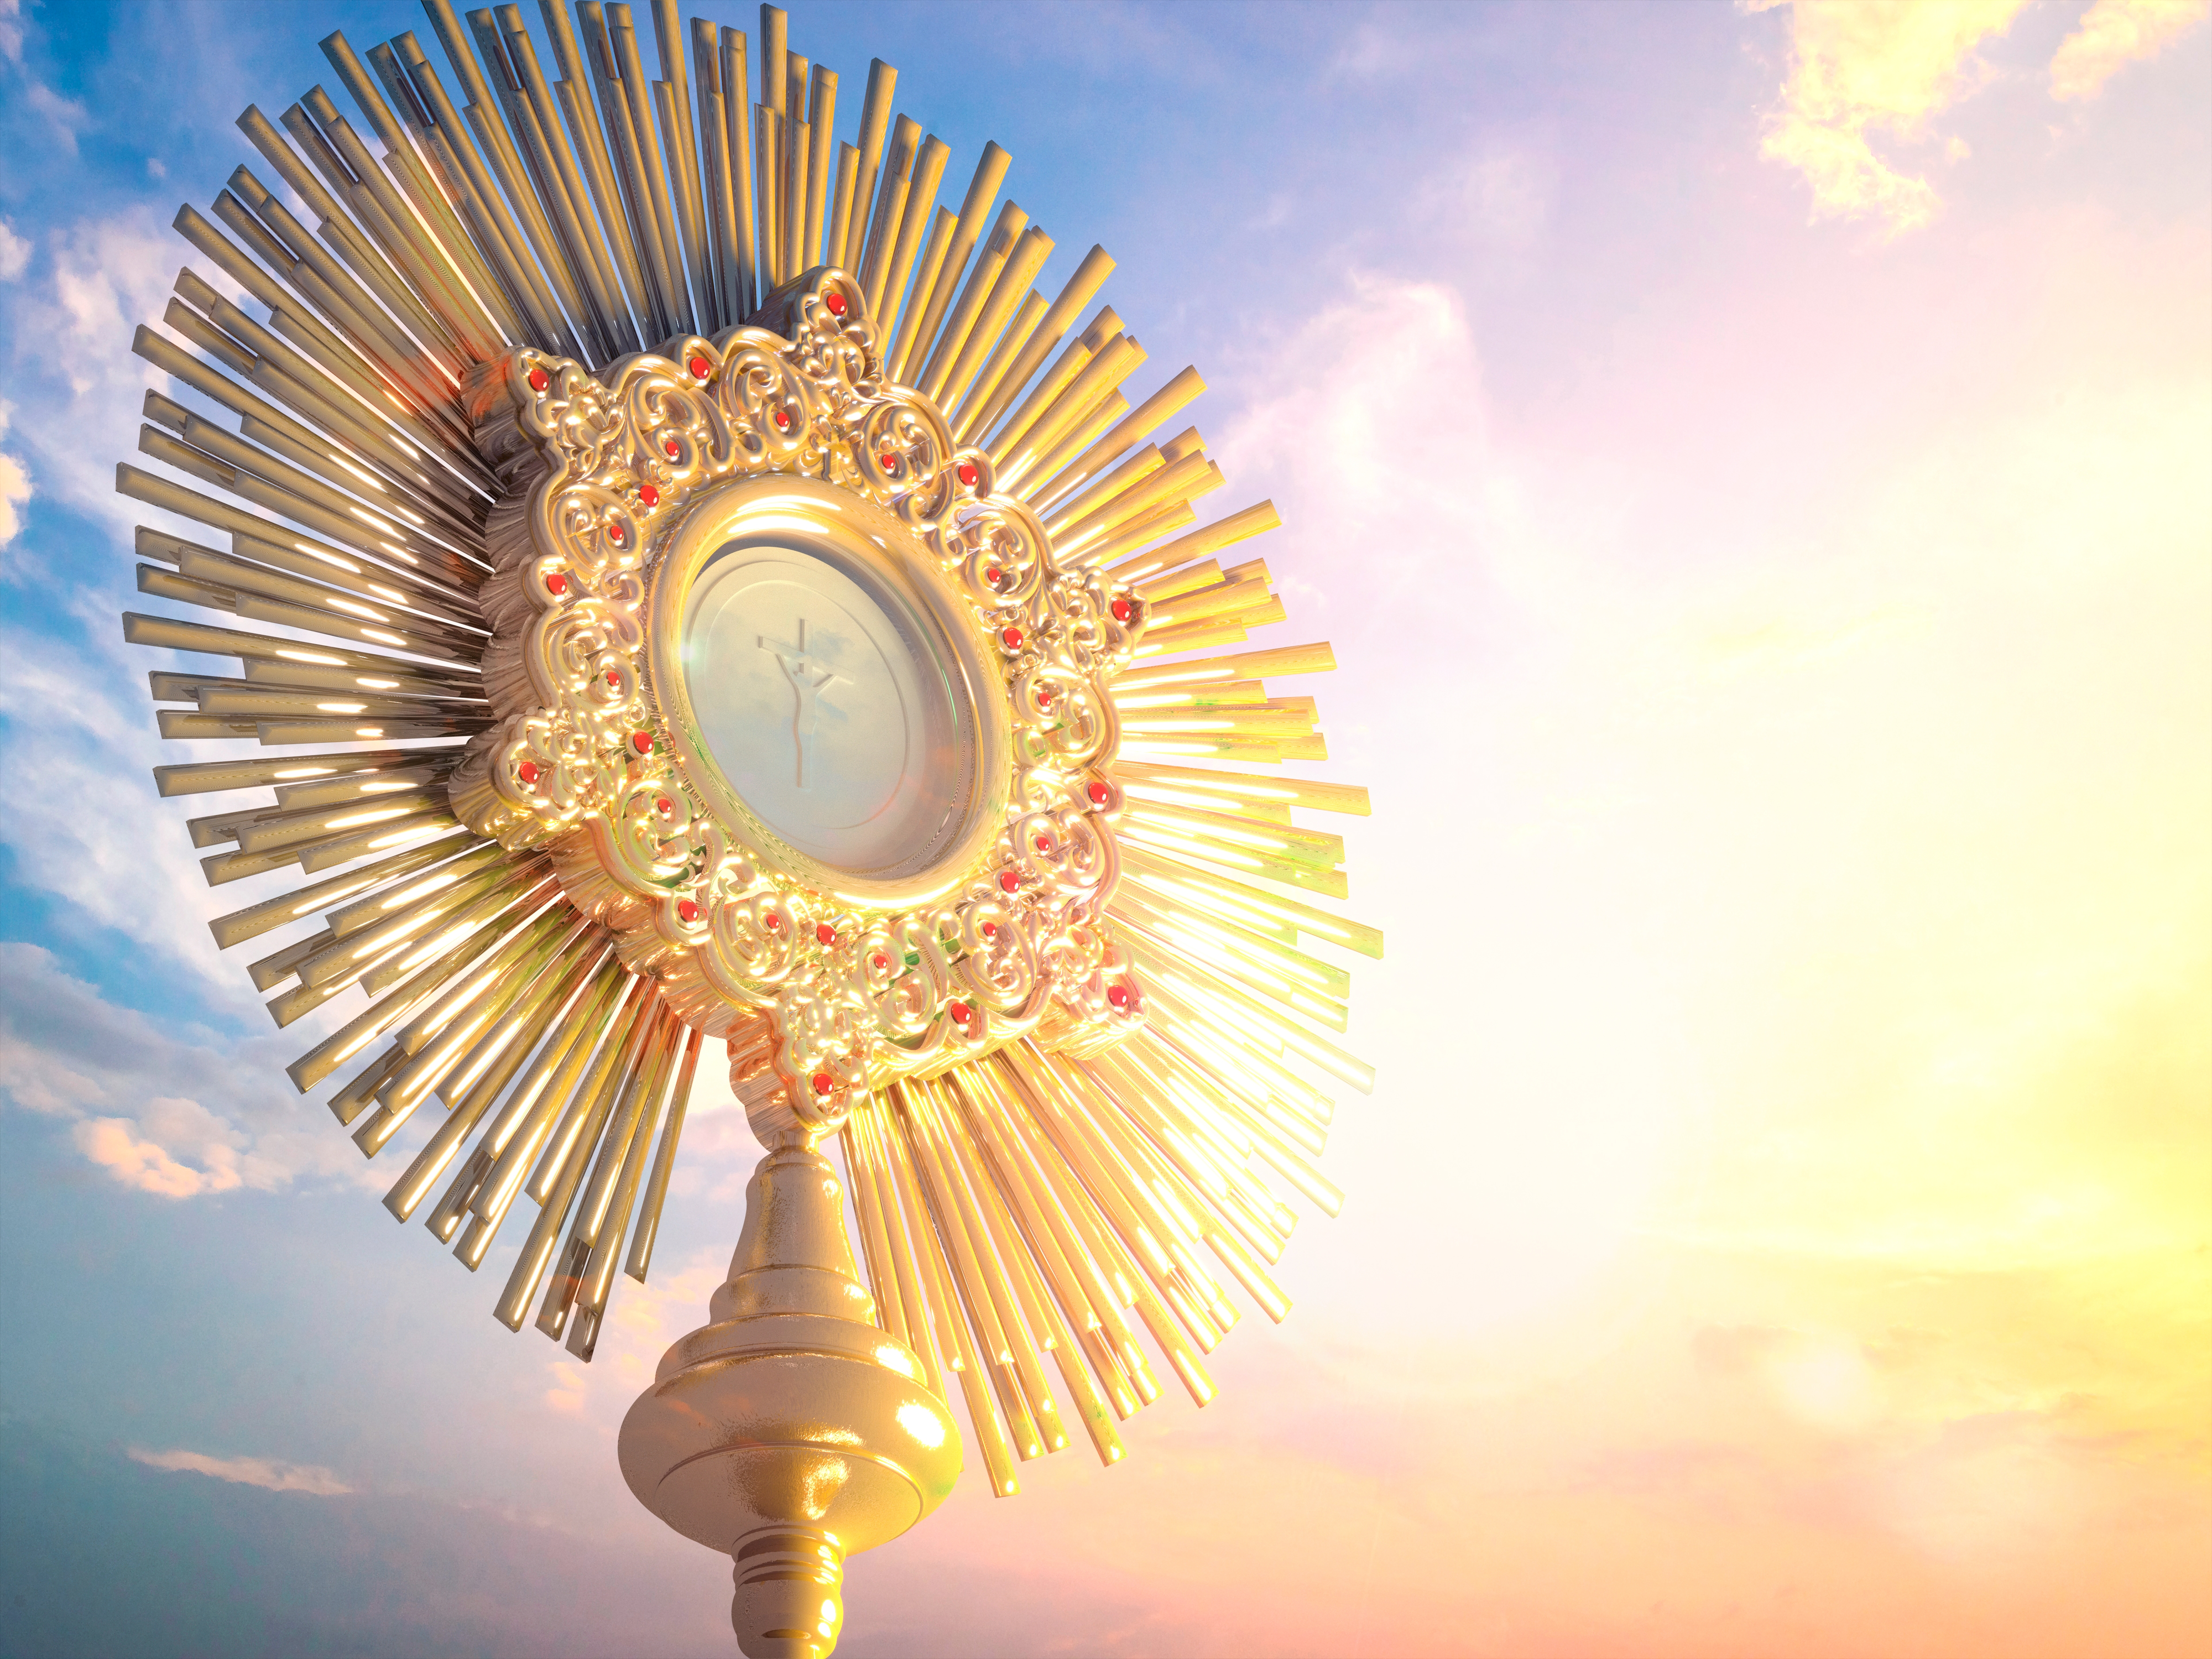 "How Can I Improve My Time in Adoration?" (Morning Air)